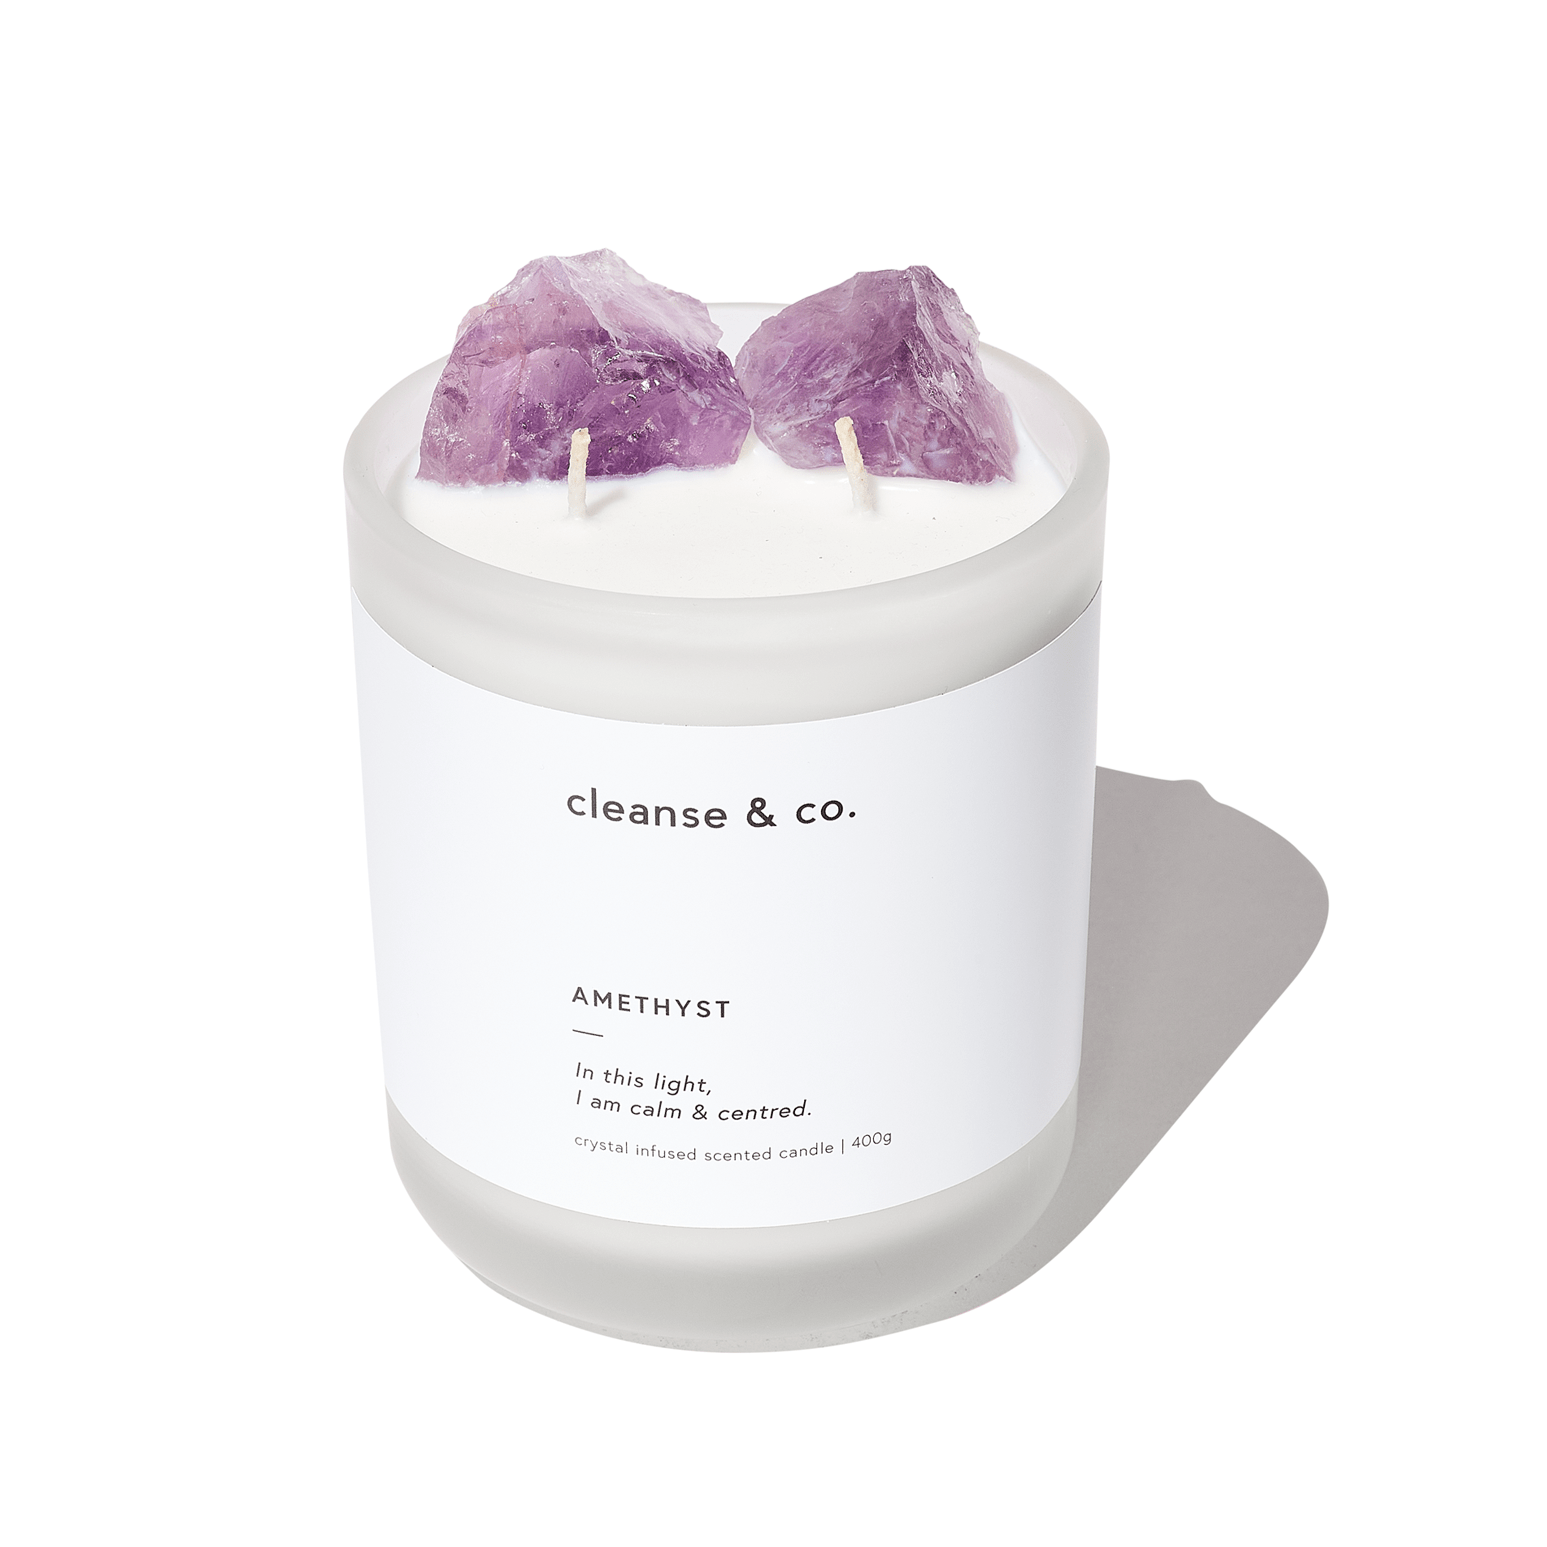 amethyst crystal candle 400g by Cleanse & co